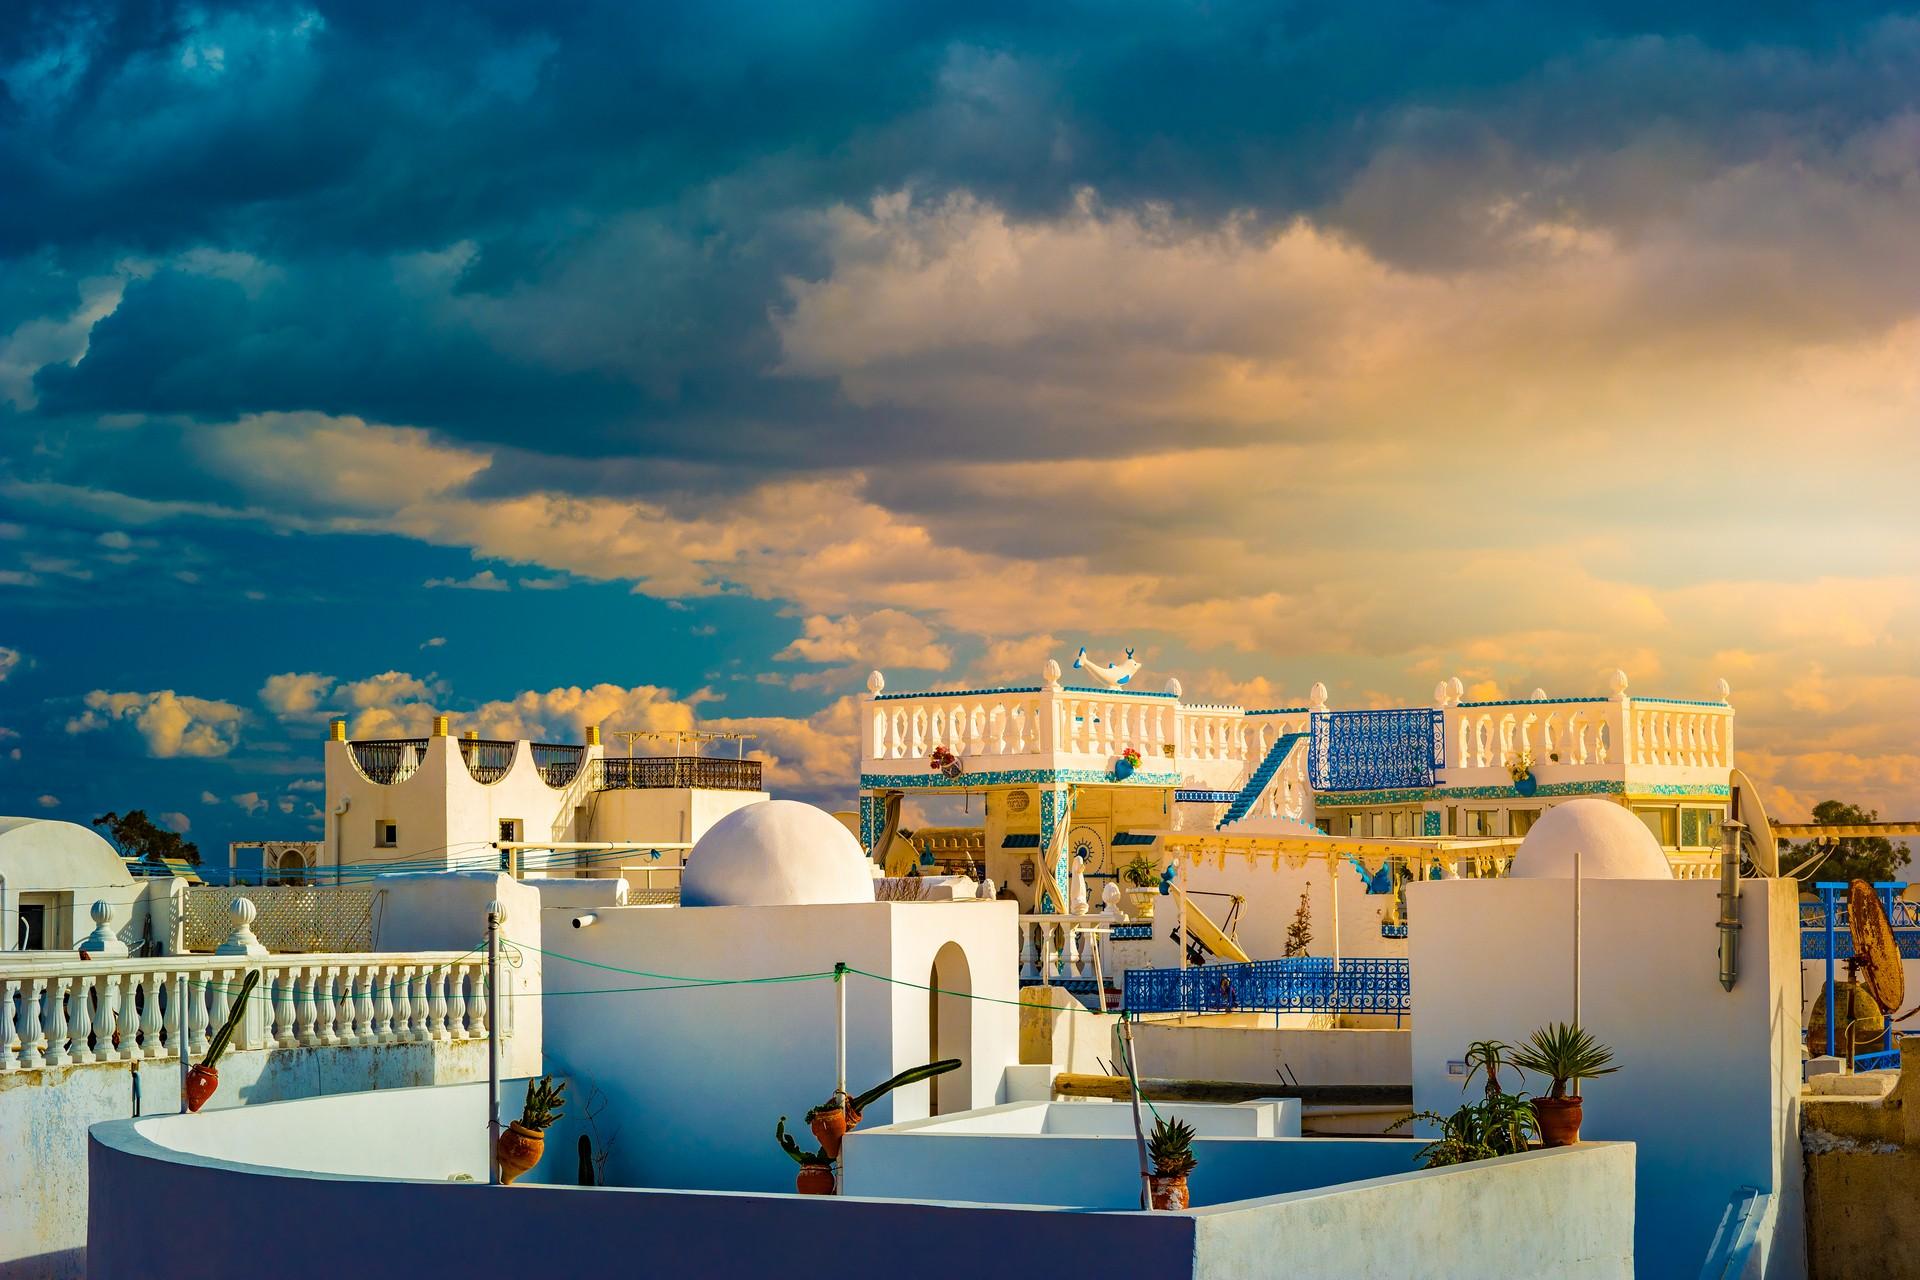 Architecture in Hammamet at sunset time